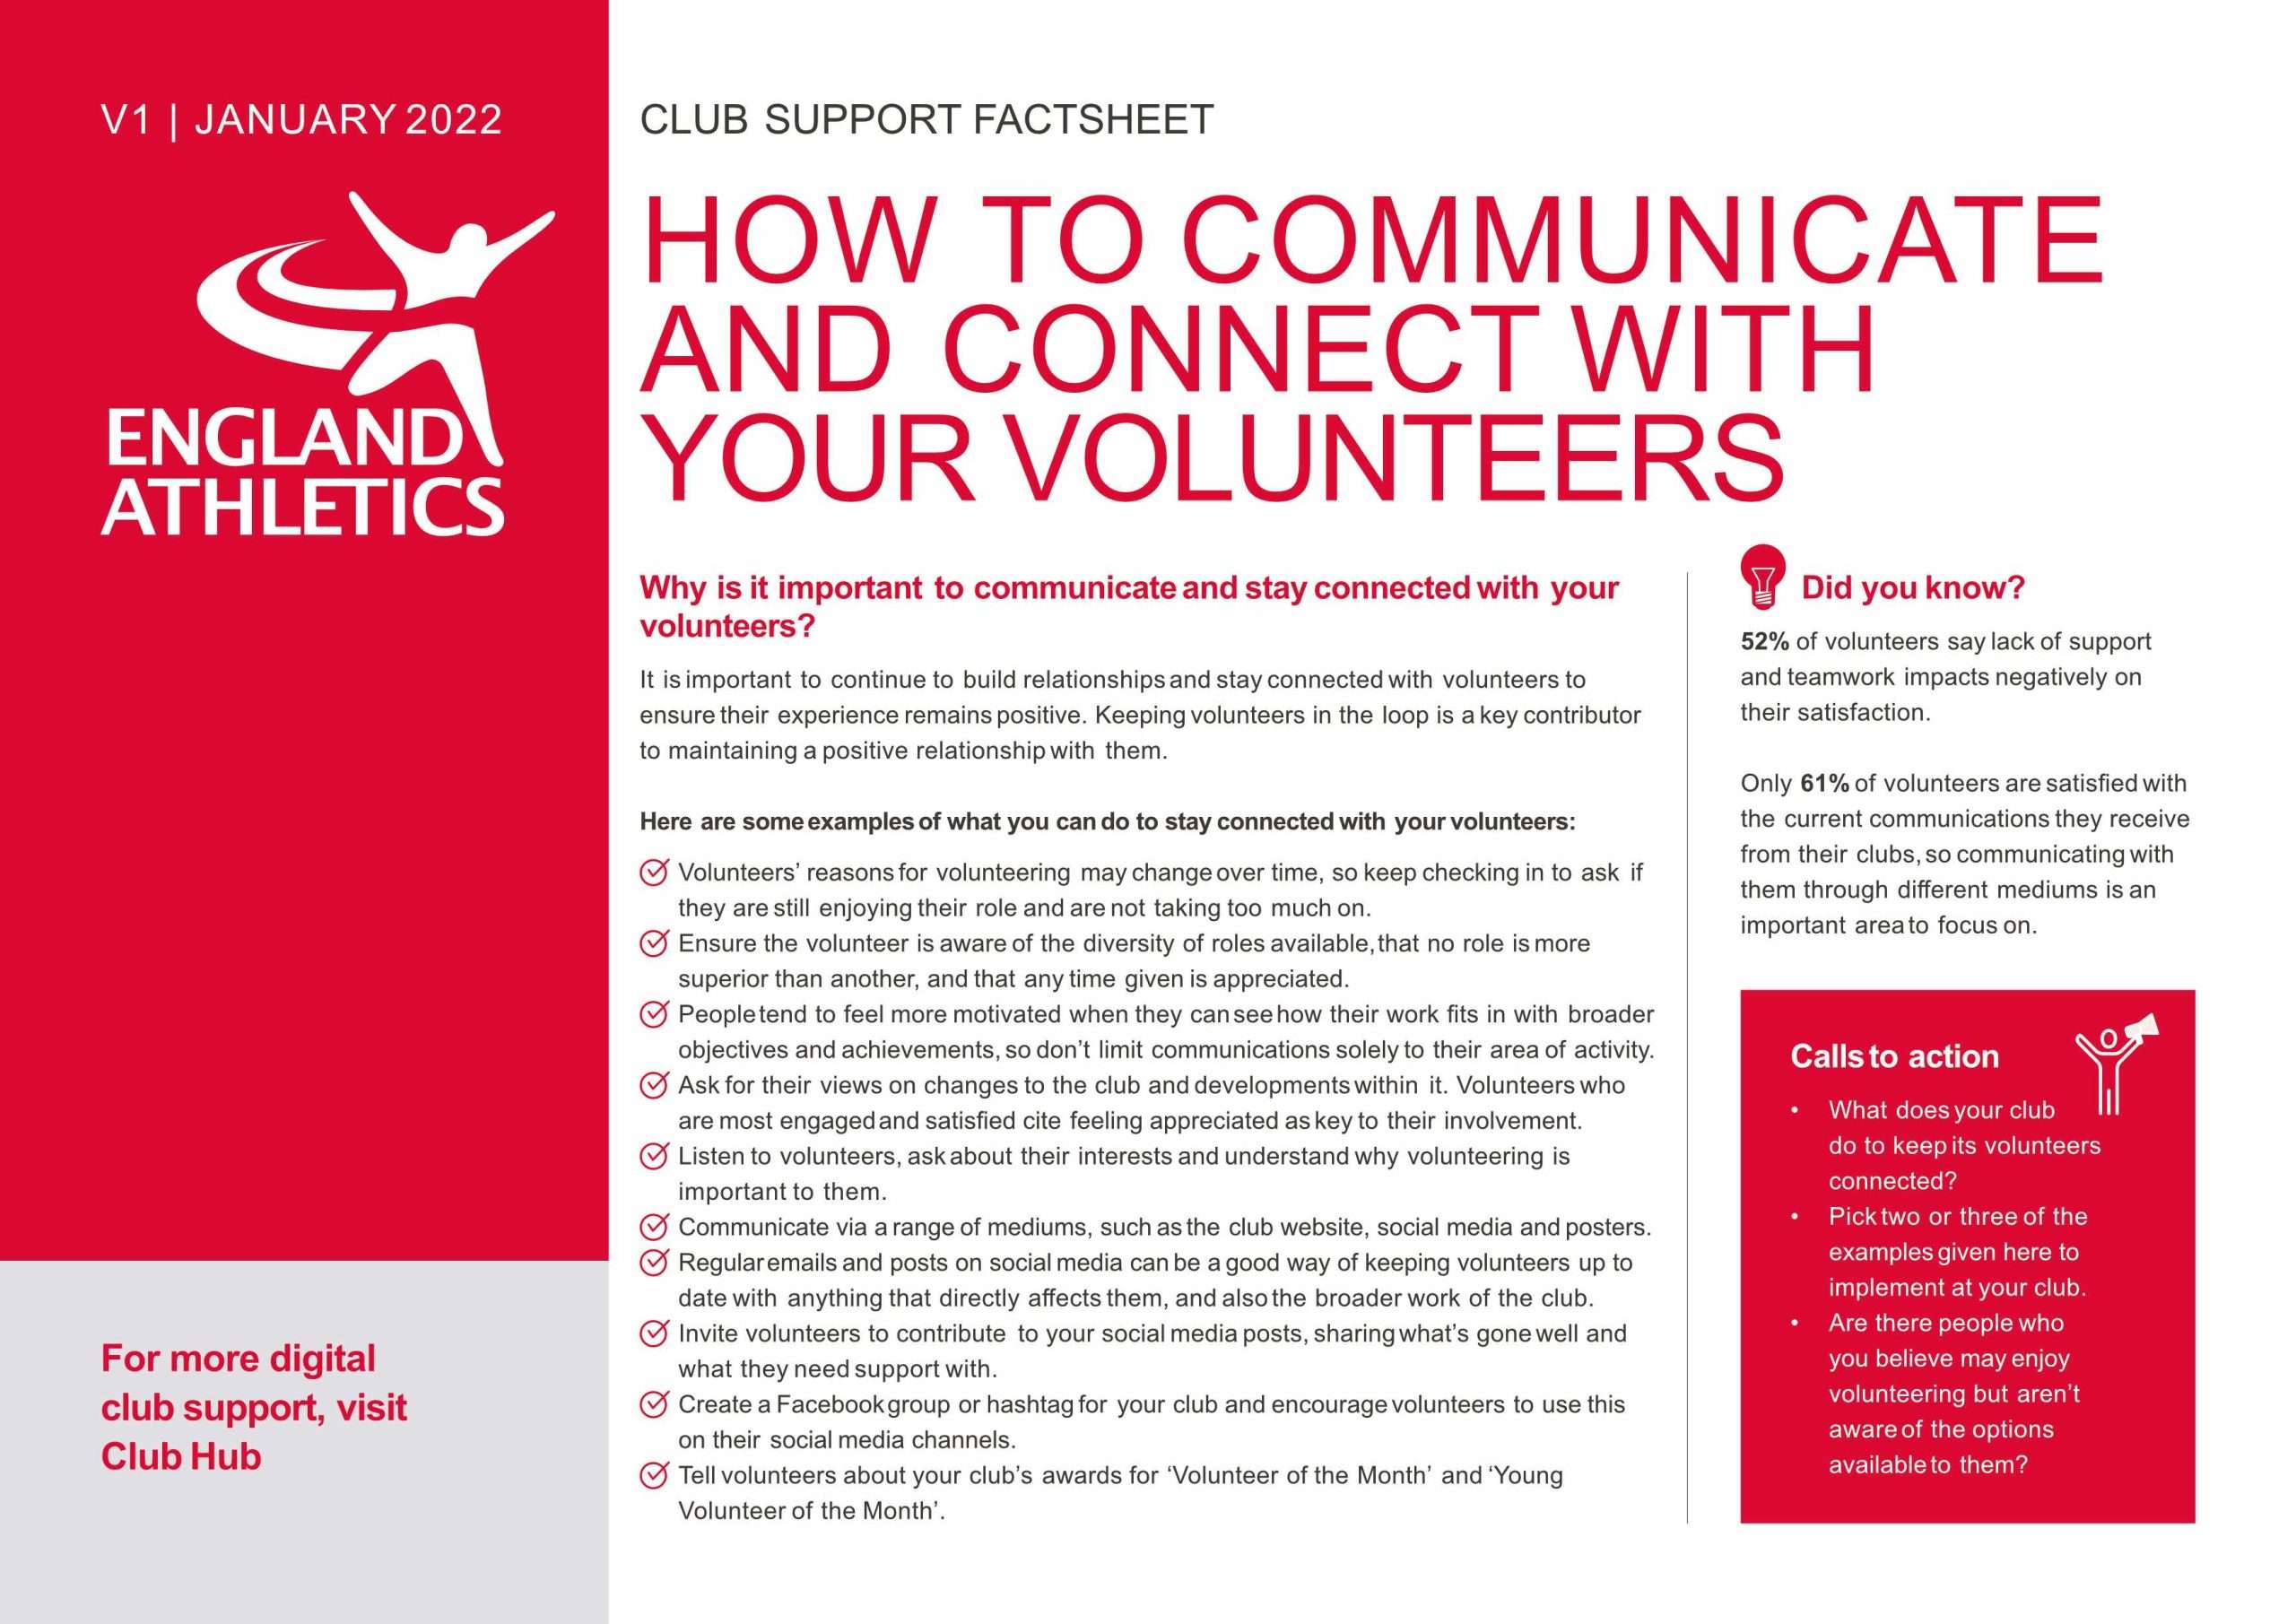 Written factsheet for England Athletics about how to communicate and connect with volunteers.